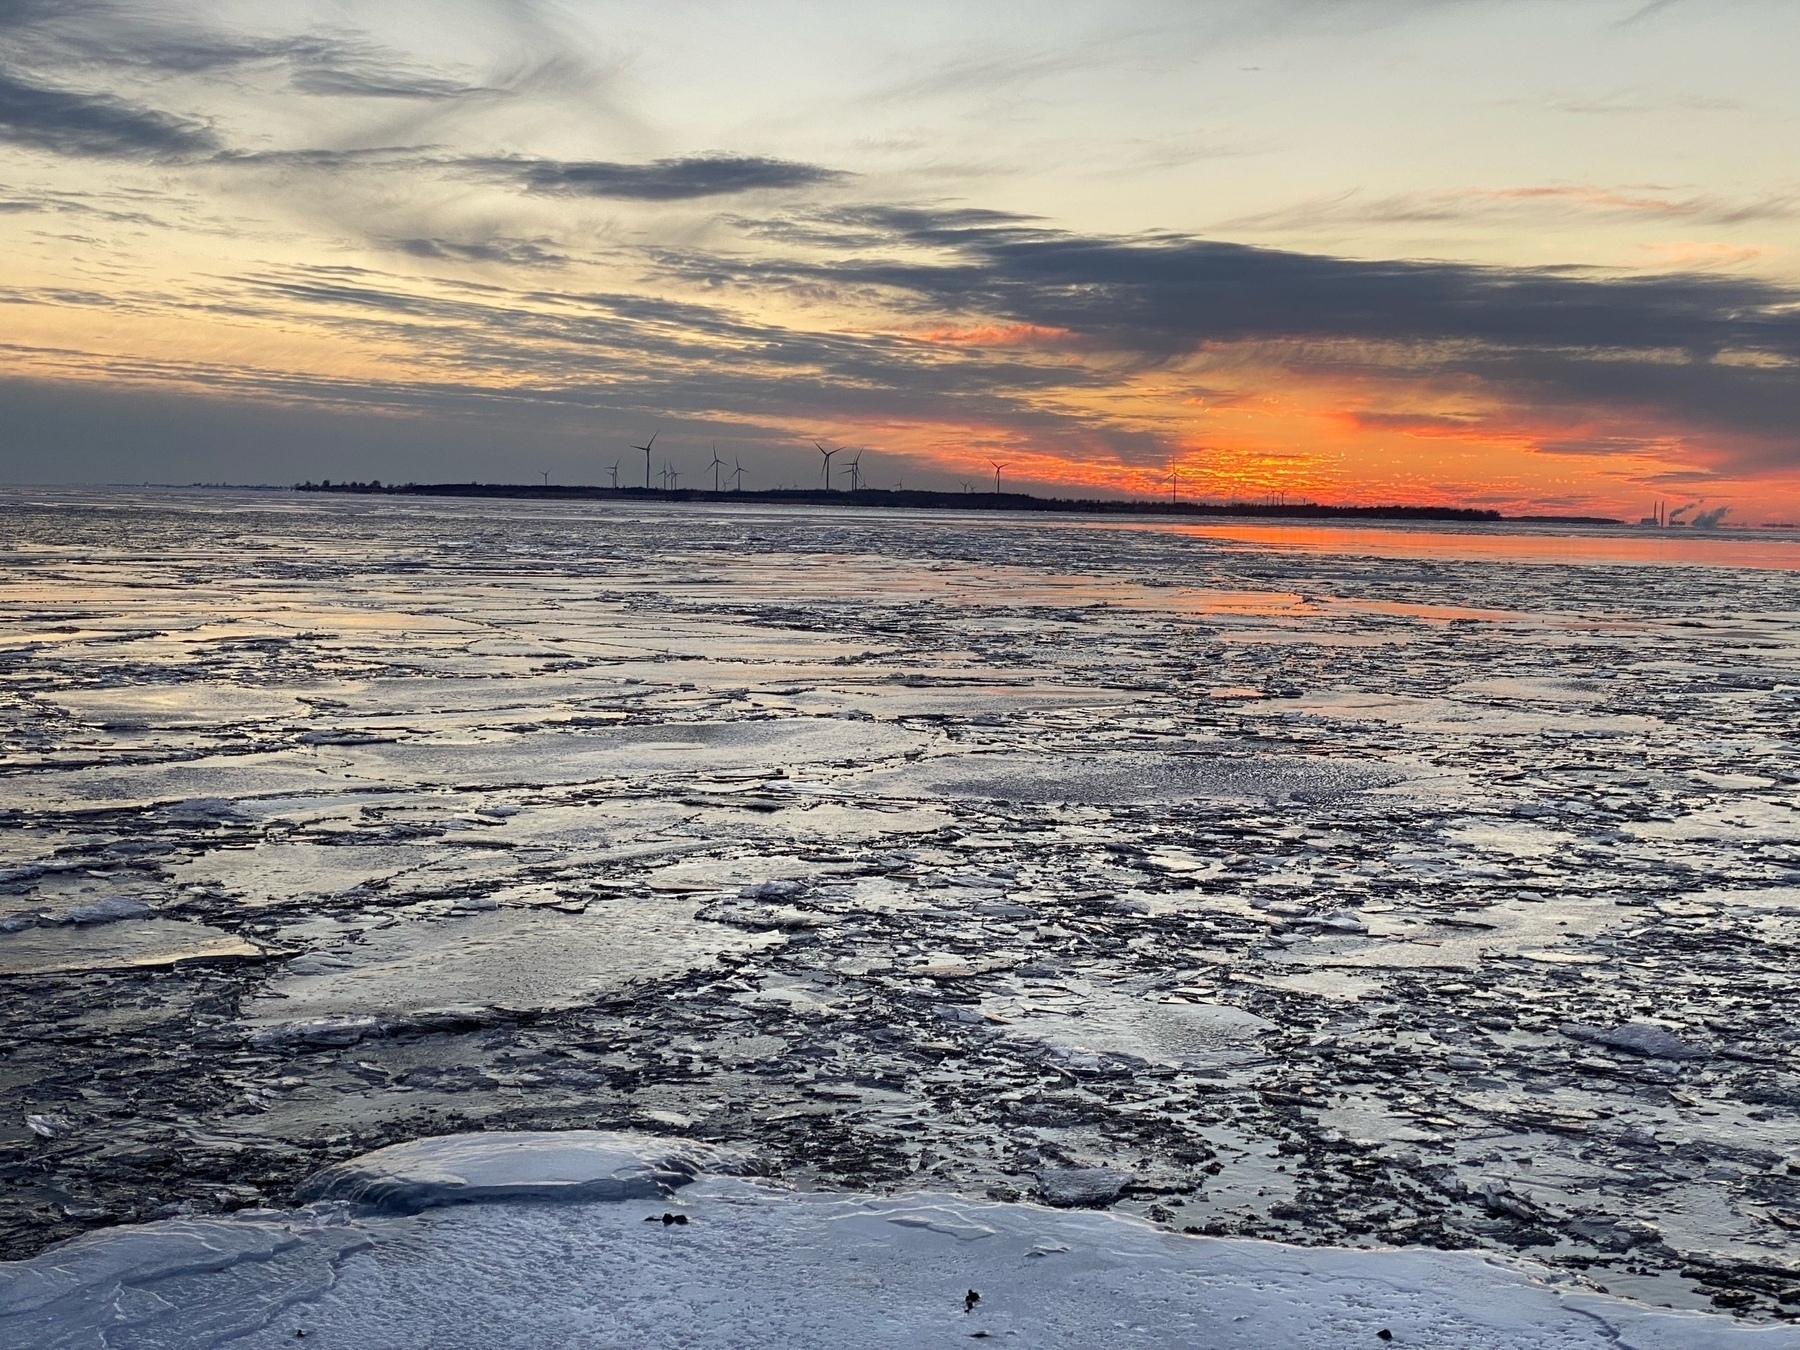 Lake with ice forming, fiery sunset